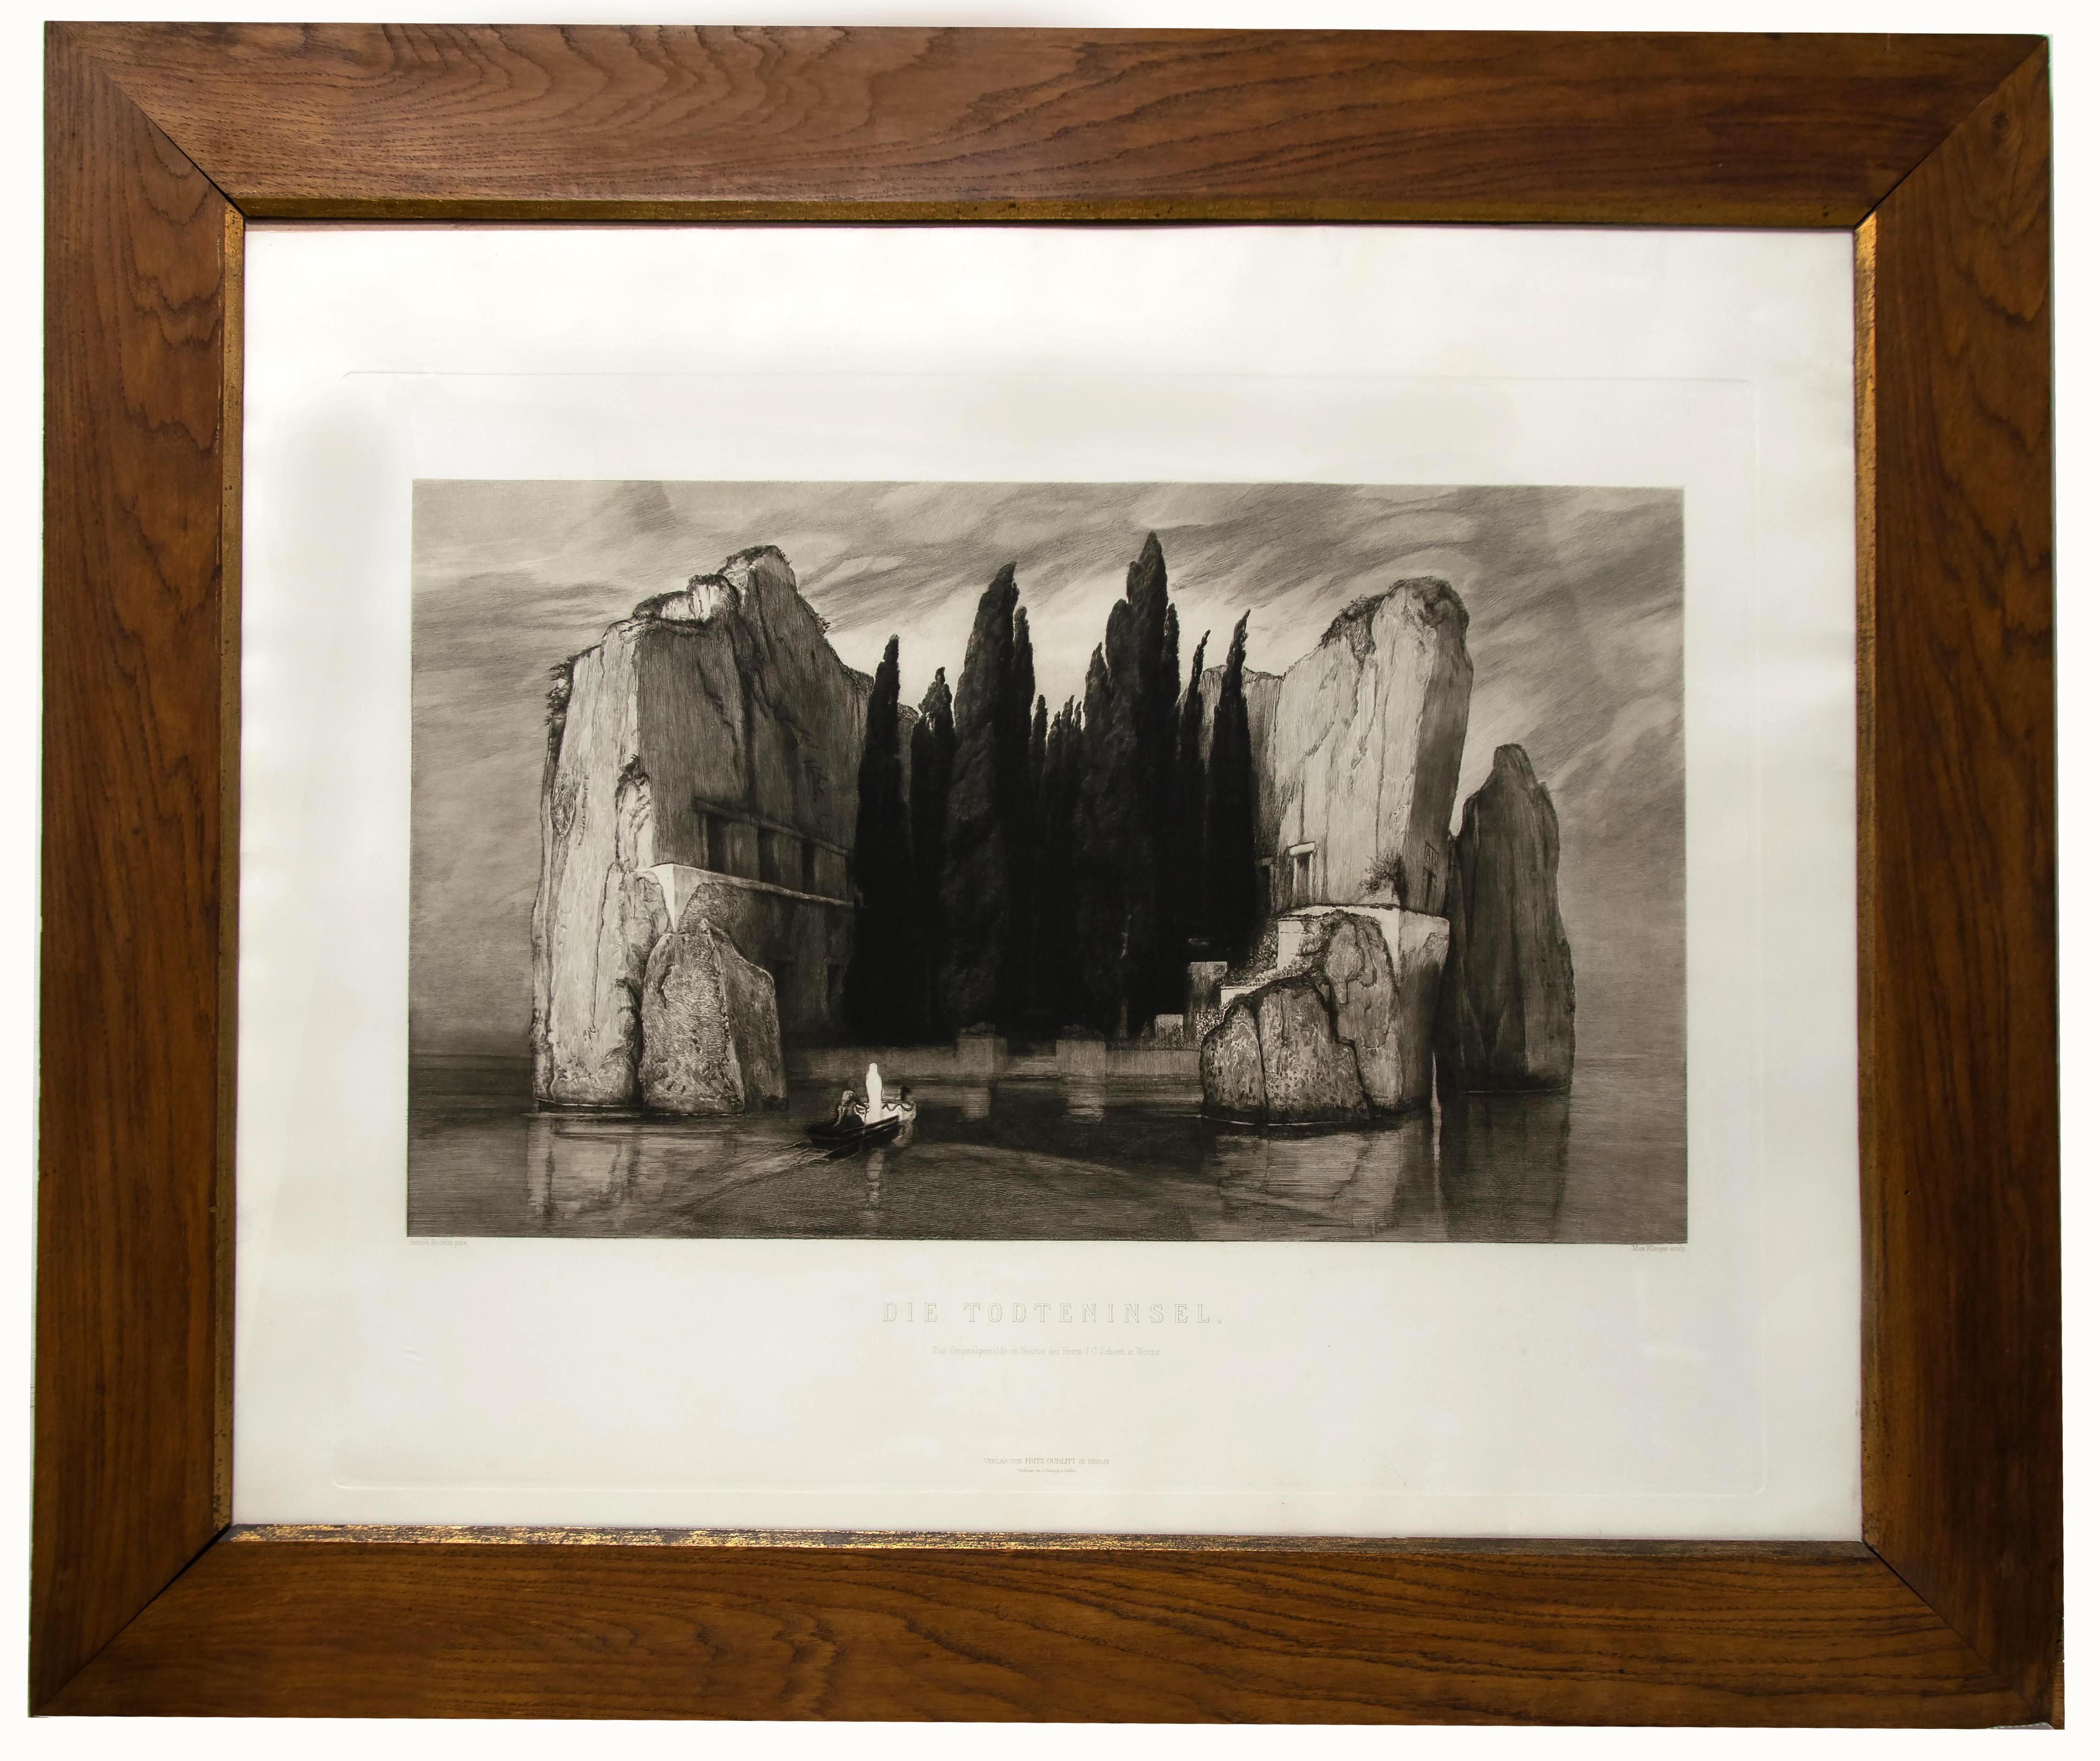 Die Toteninsel (The Isle of the Dead) - by M. Klinger after A. Bocklin - 1890 - Print by Max Klinger